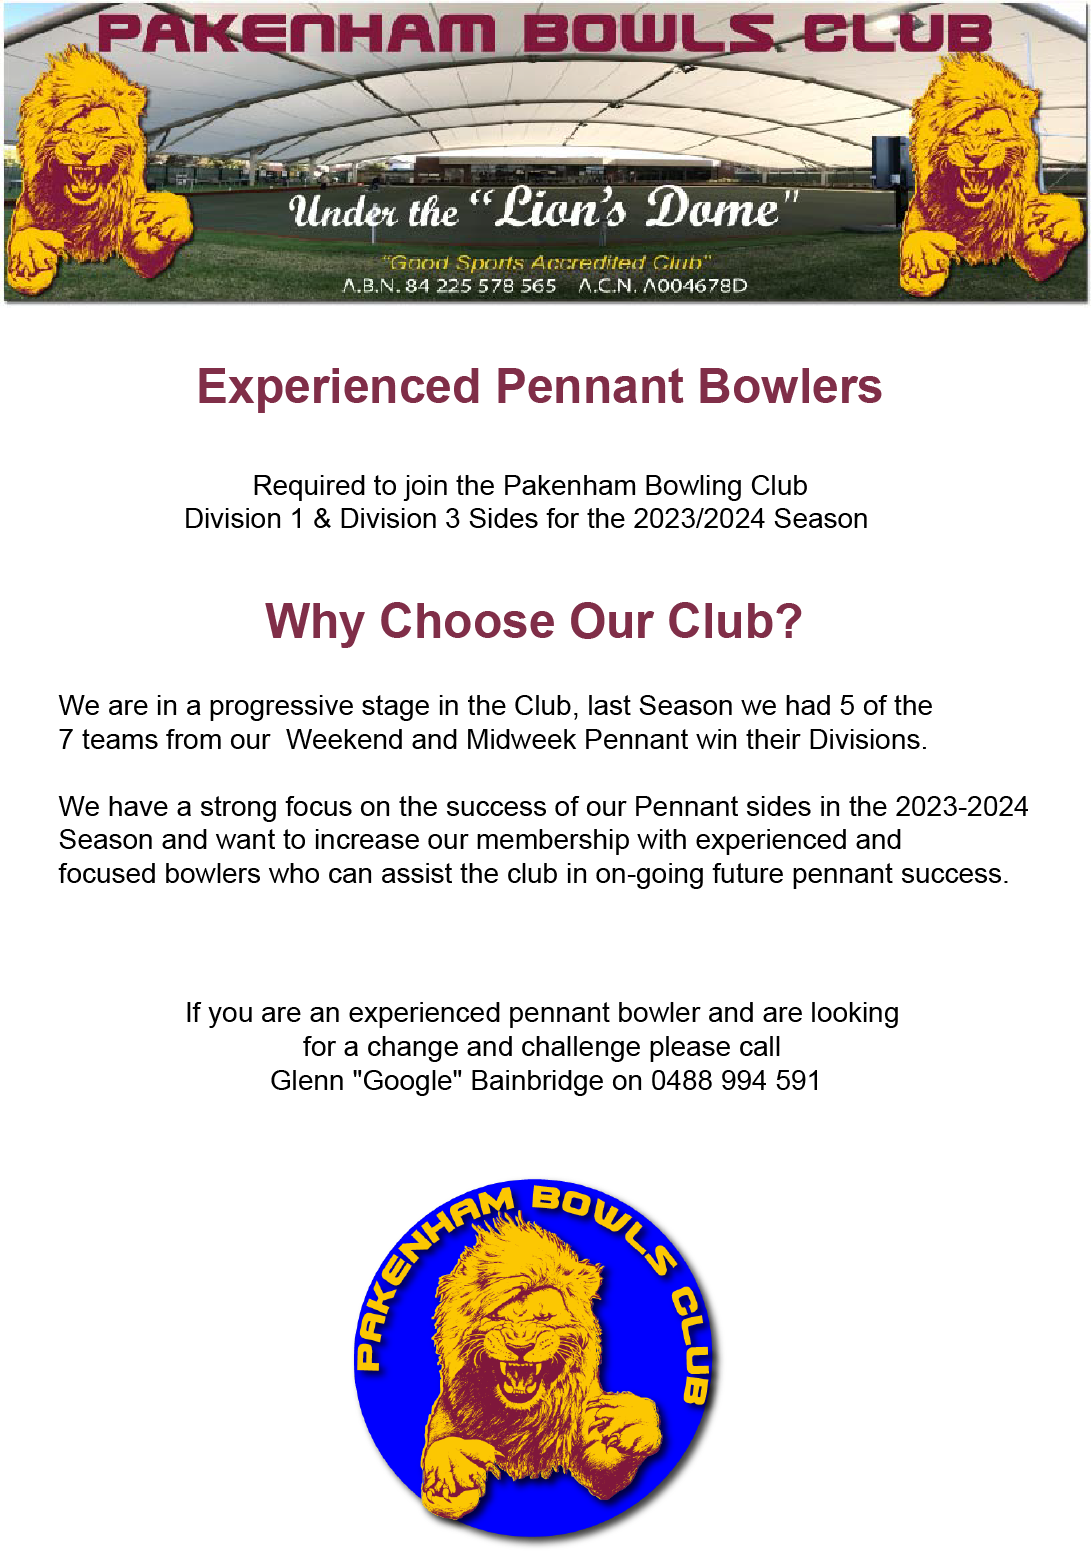 Pakenham Bowls Club, Experienced pennant bowlers. Required to join PBC Division 1 and Division 3 Sides for 2023 - 2024 season. Why choose our Club, we are in a progressive stage in the Club, last season we had 5 of the 7 teams from our Weekend and Midweek Pennant win their Divisions. We have a strong focus on the success of our Pennant sides in the 2023-2024 season and want to increase our membership with experience and focused bowlers who can assist the club in on going future pennant success. If you are an experienced pennant bowler and are looking for a change and challenge please call Glenn "Google" Bainbridge on 0488994591